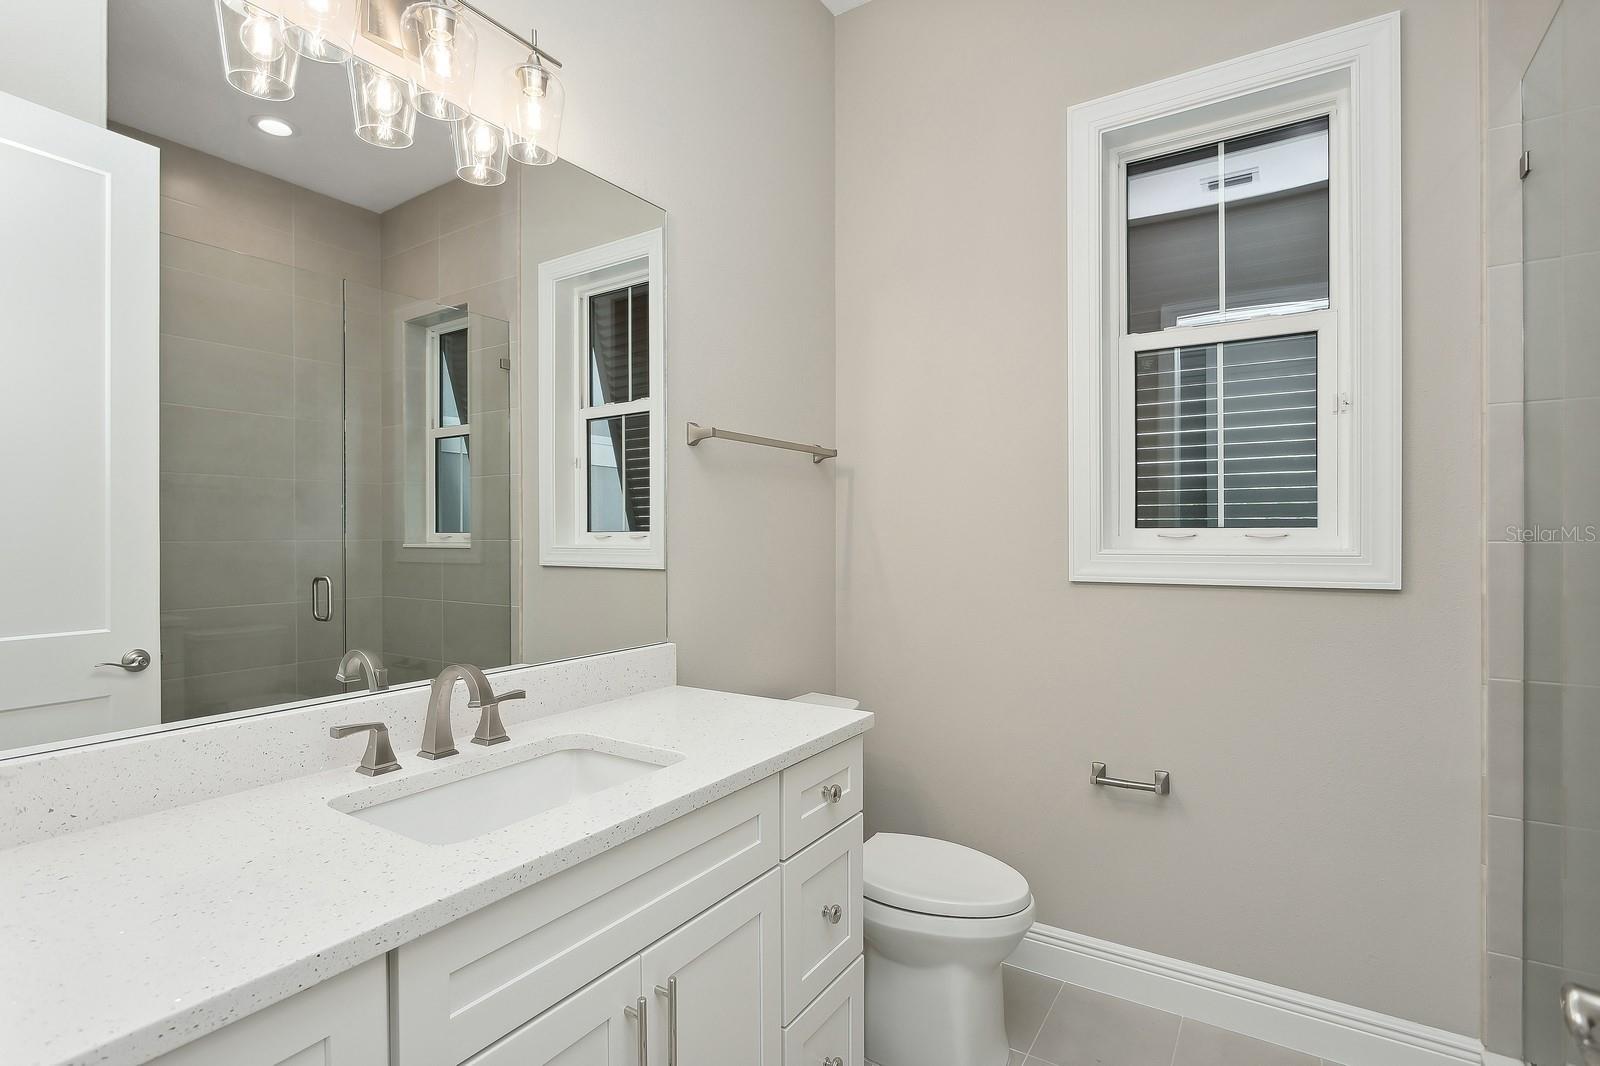 All baths have wall tile to ceilings and framless glass doors.